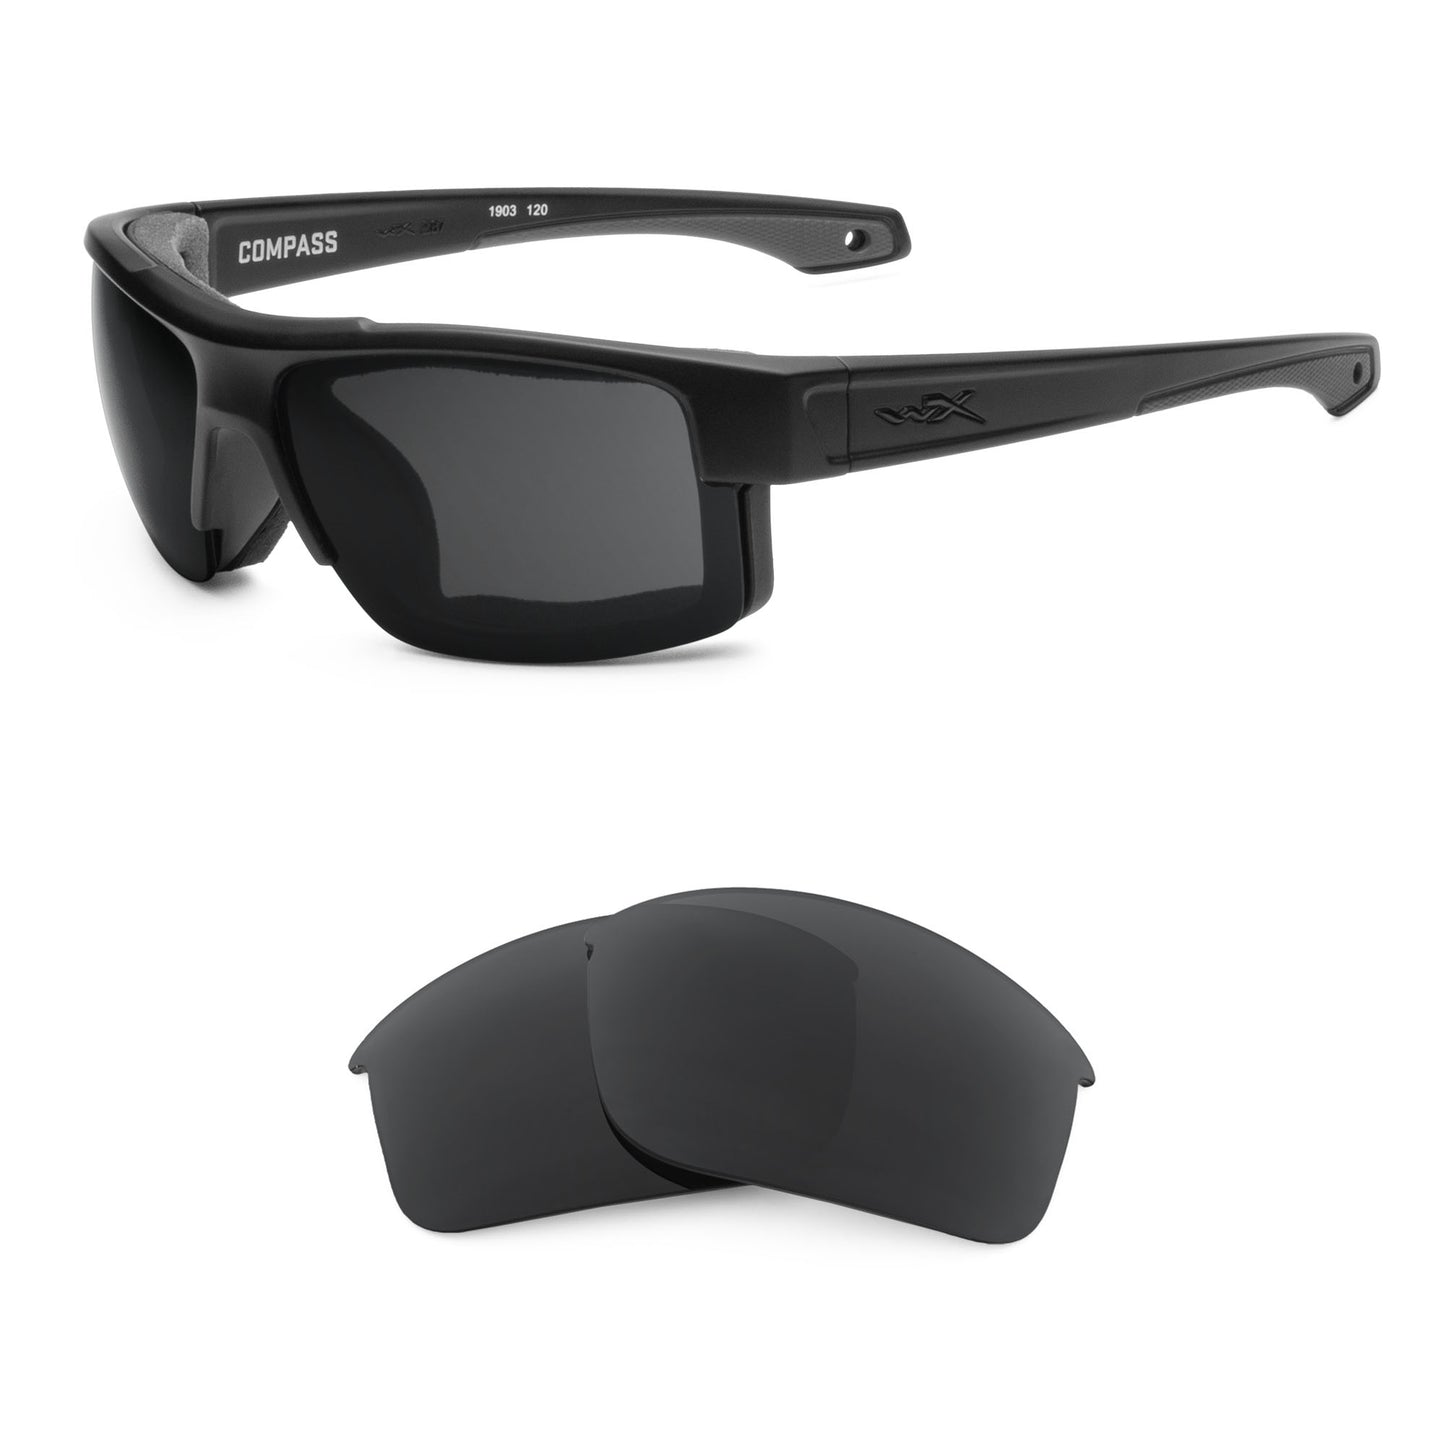 Wiley X Compass sunglasses with replacement lenses